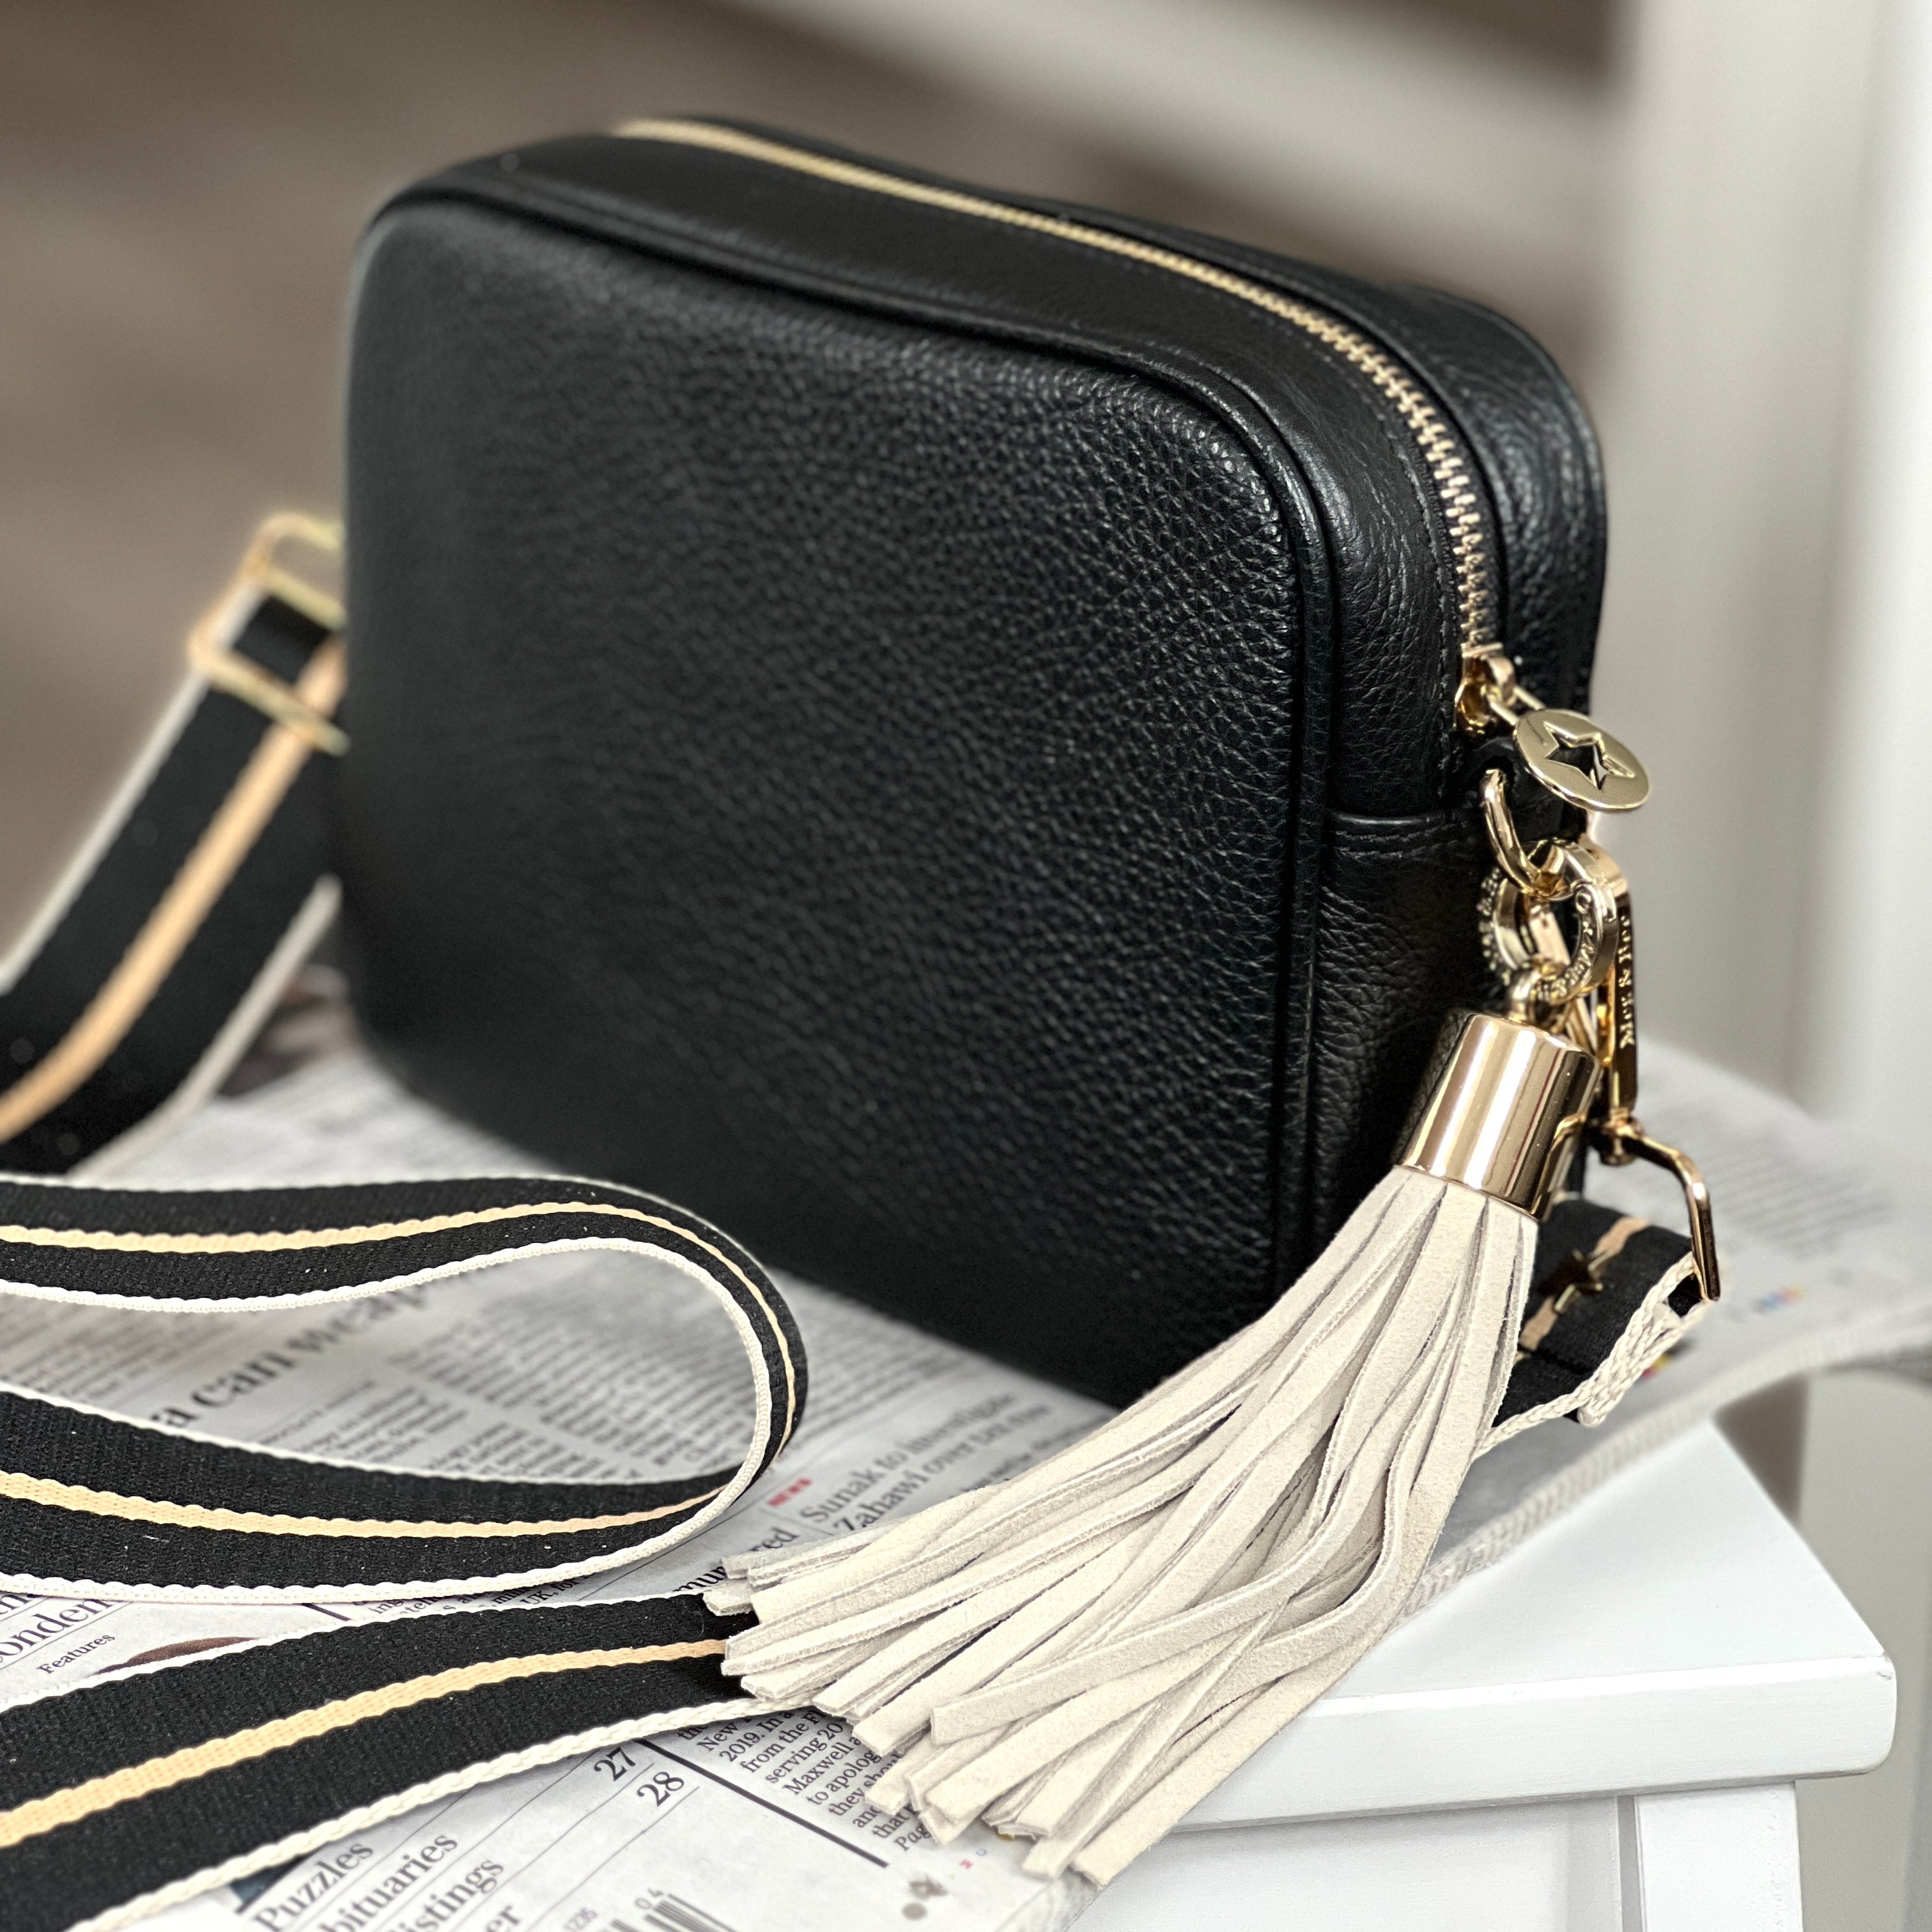 The original leather crossbody bags with interchangeable straps. – Meg & Bee